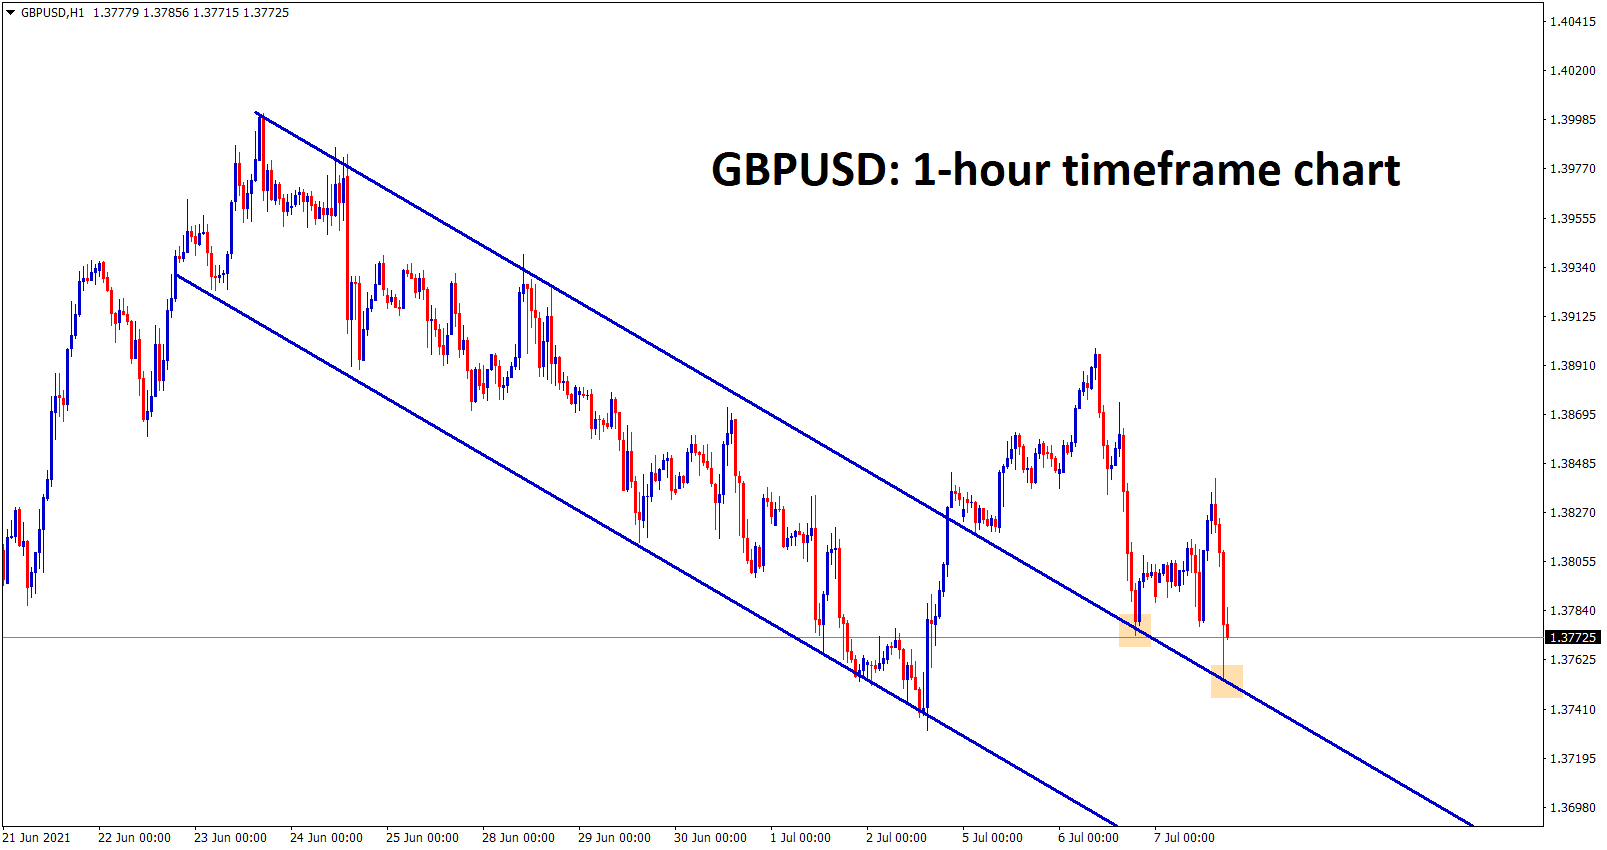 GBPUSD is falling down continuously with sellers pressure retesting happened twice at the recently broken channel level.